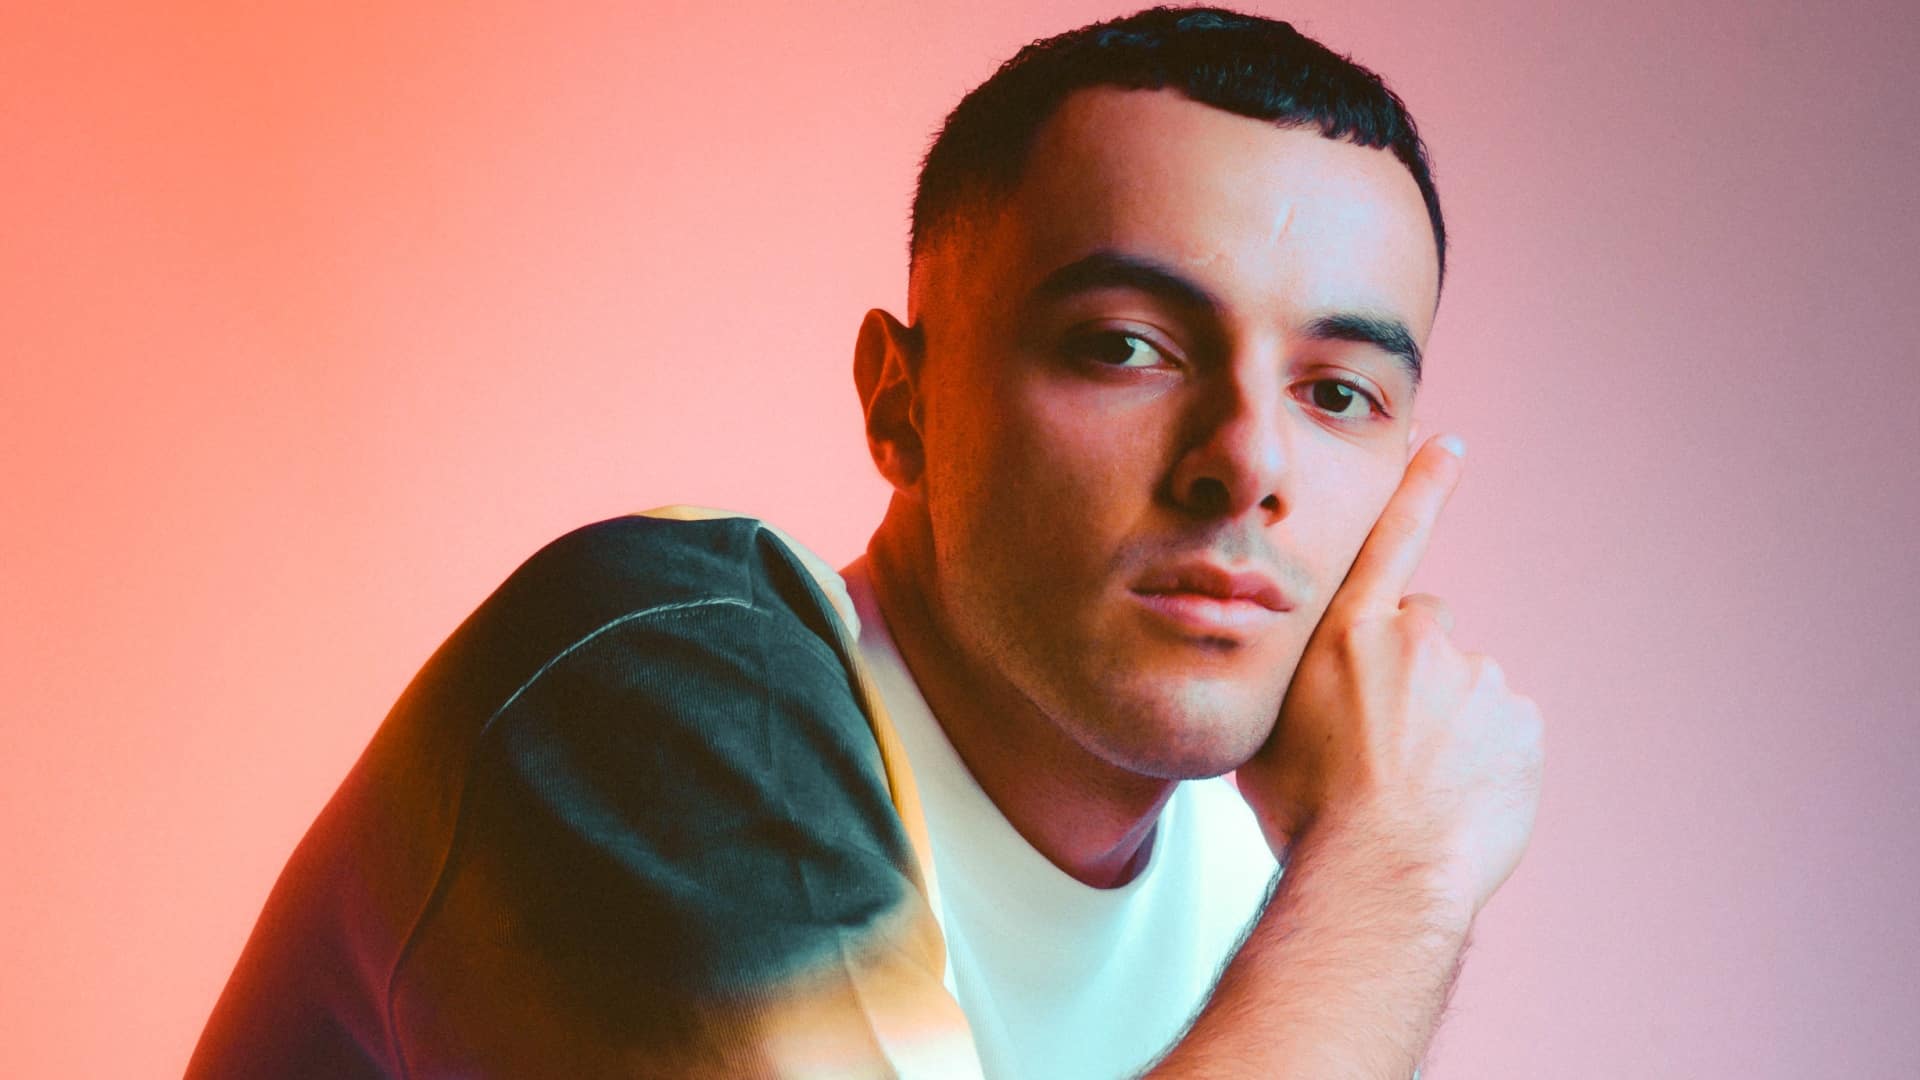 Karim Naas drops infectious new track ‘What They Say’: Listen